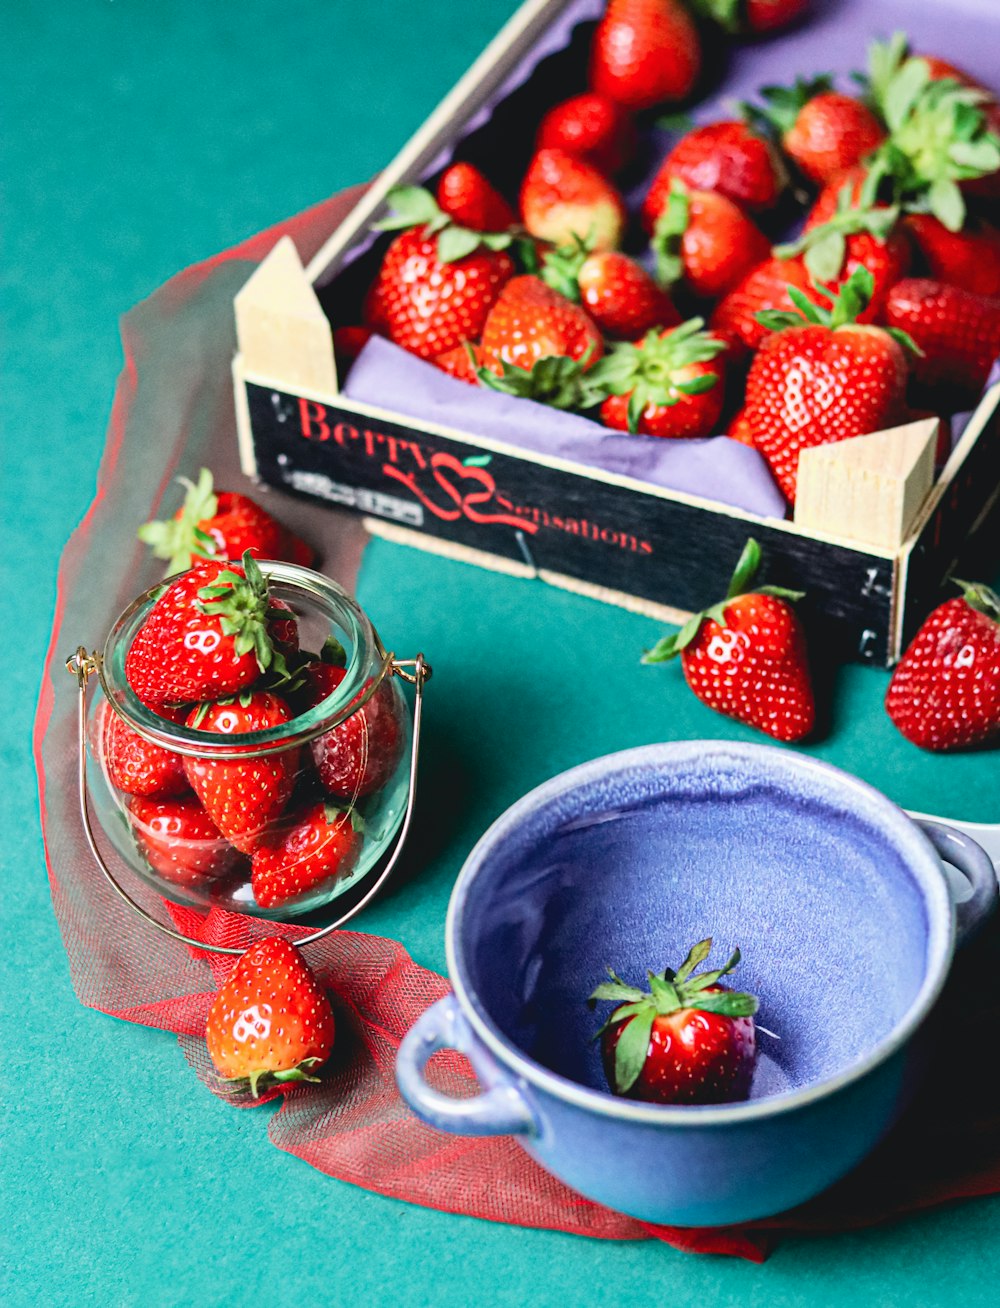 a box of strawberries next to a bowl of strawberries